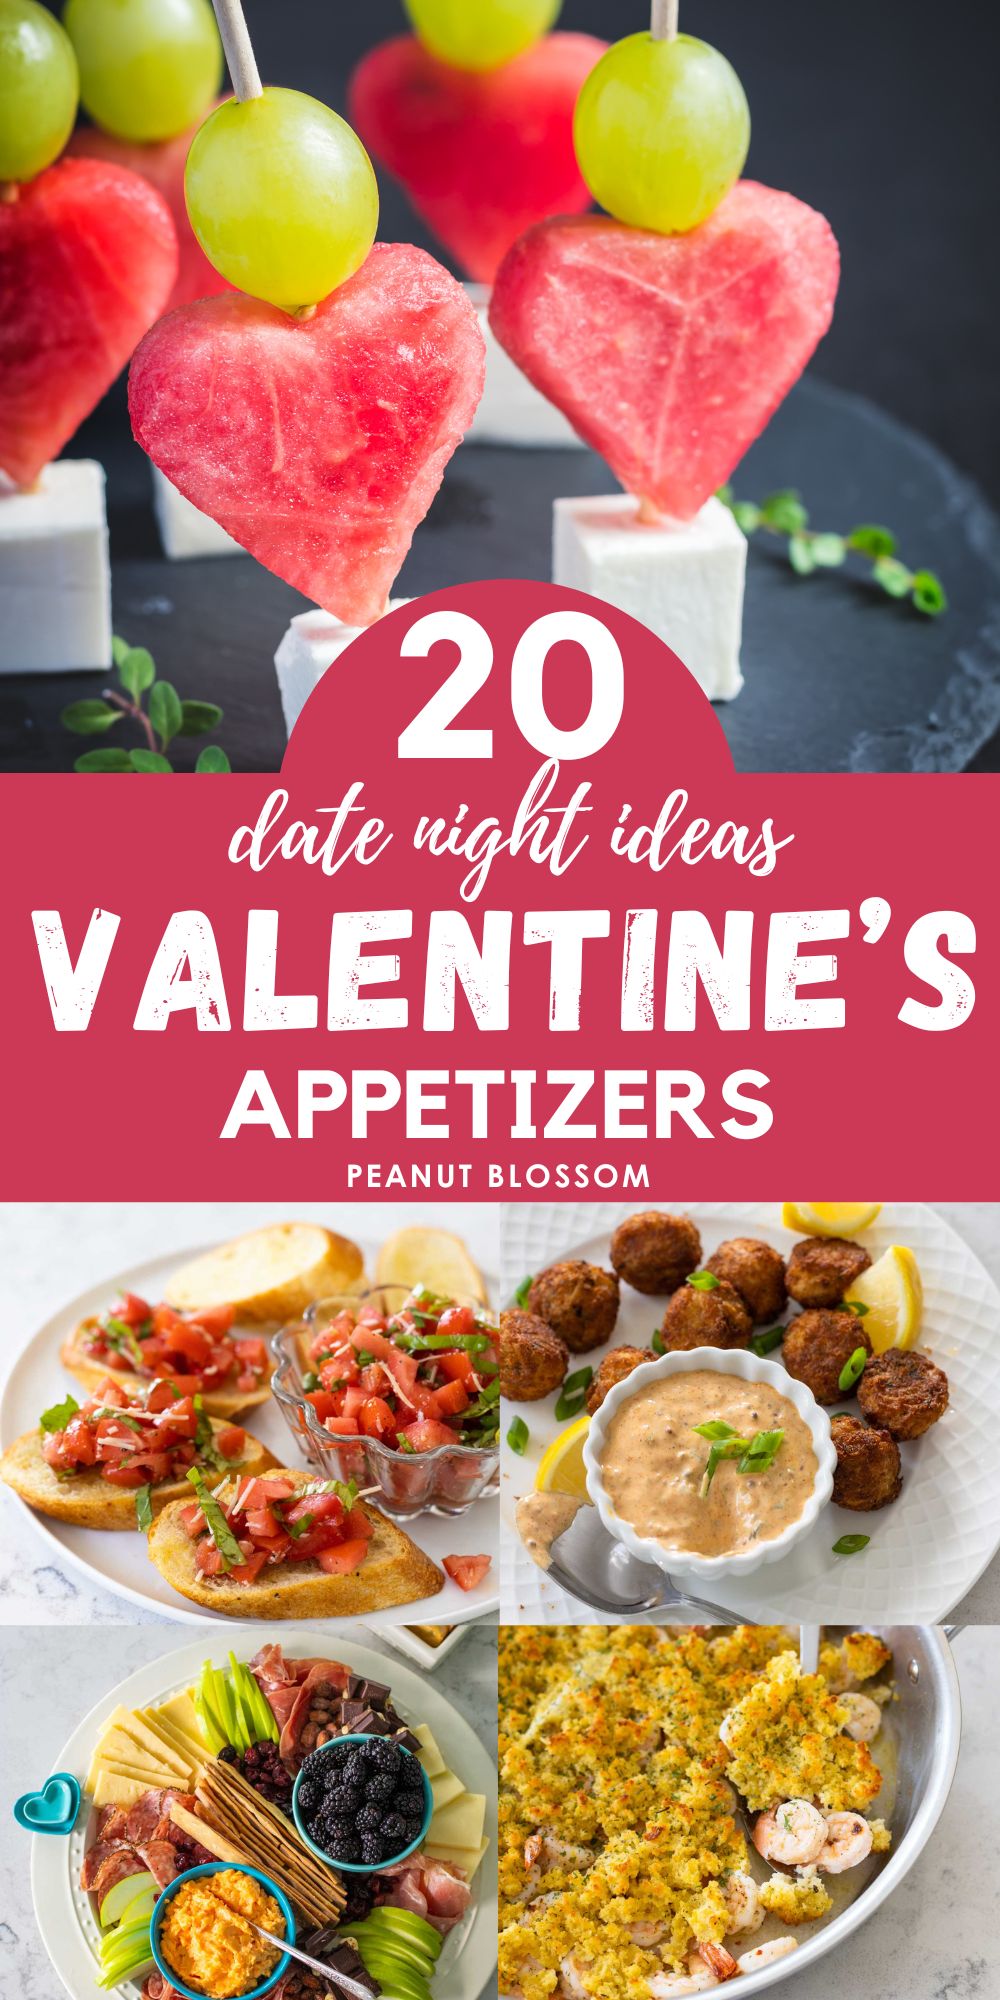 A photo collage shows 5 different appetizers for Valentine's Day.